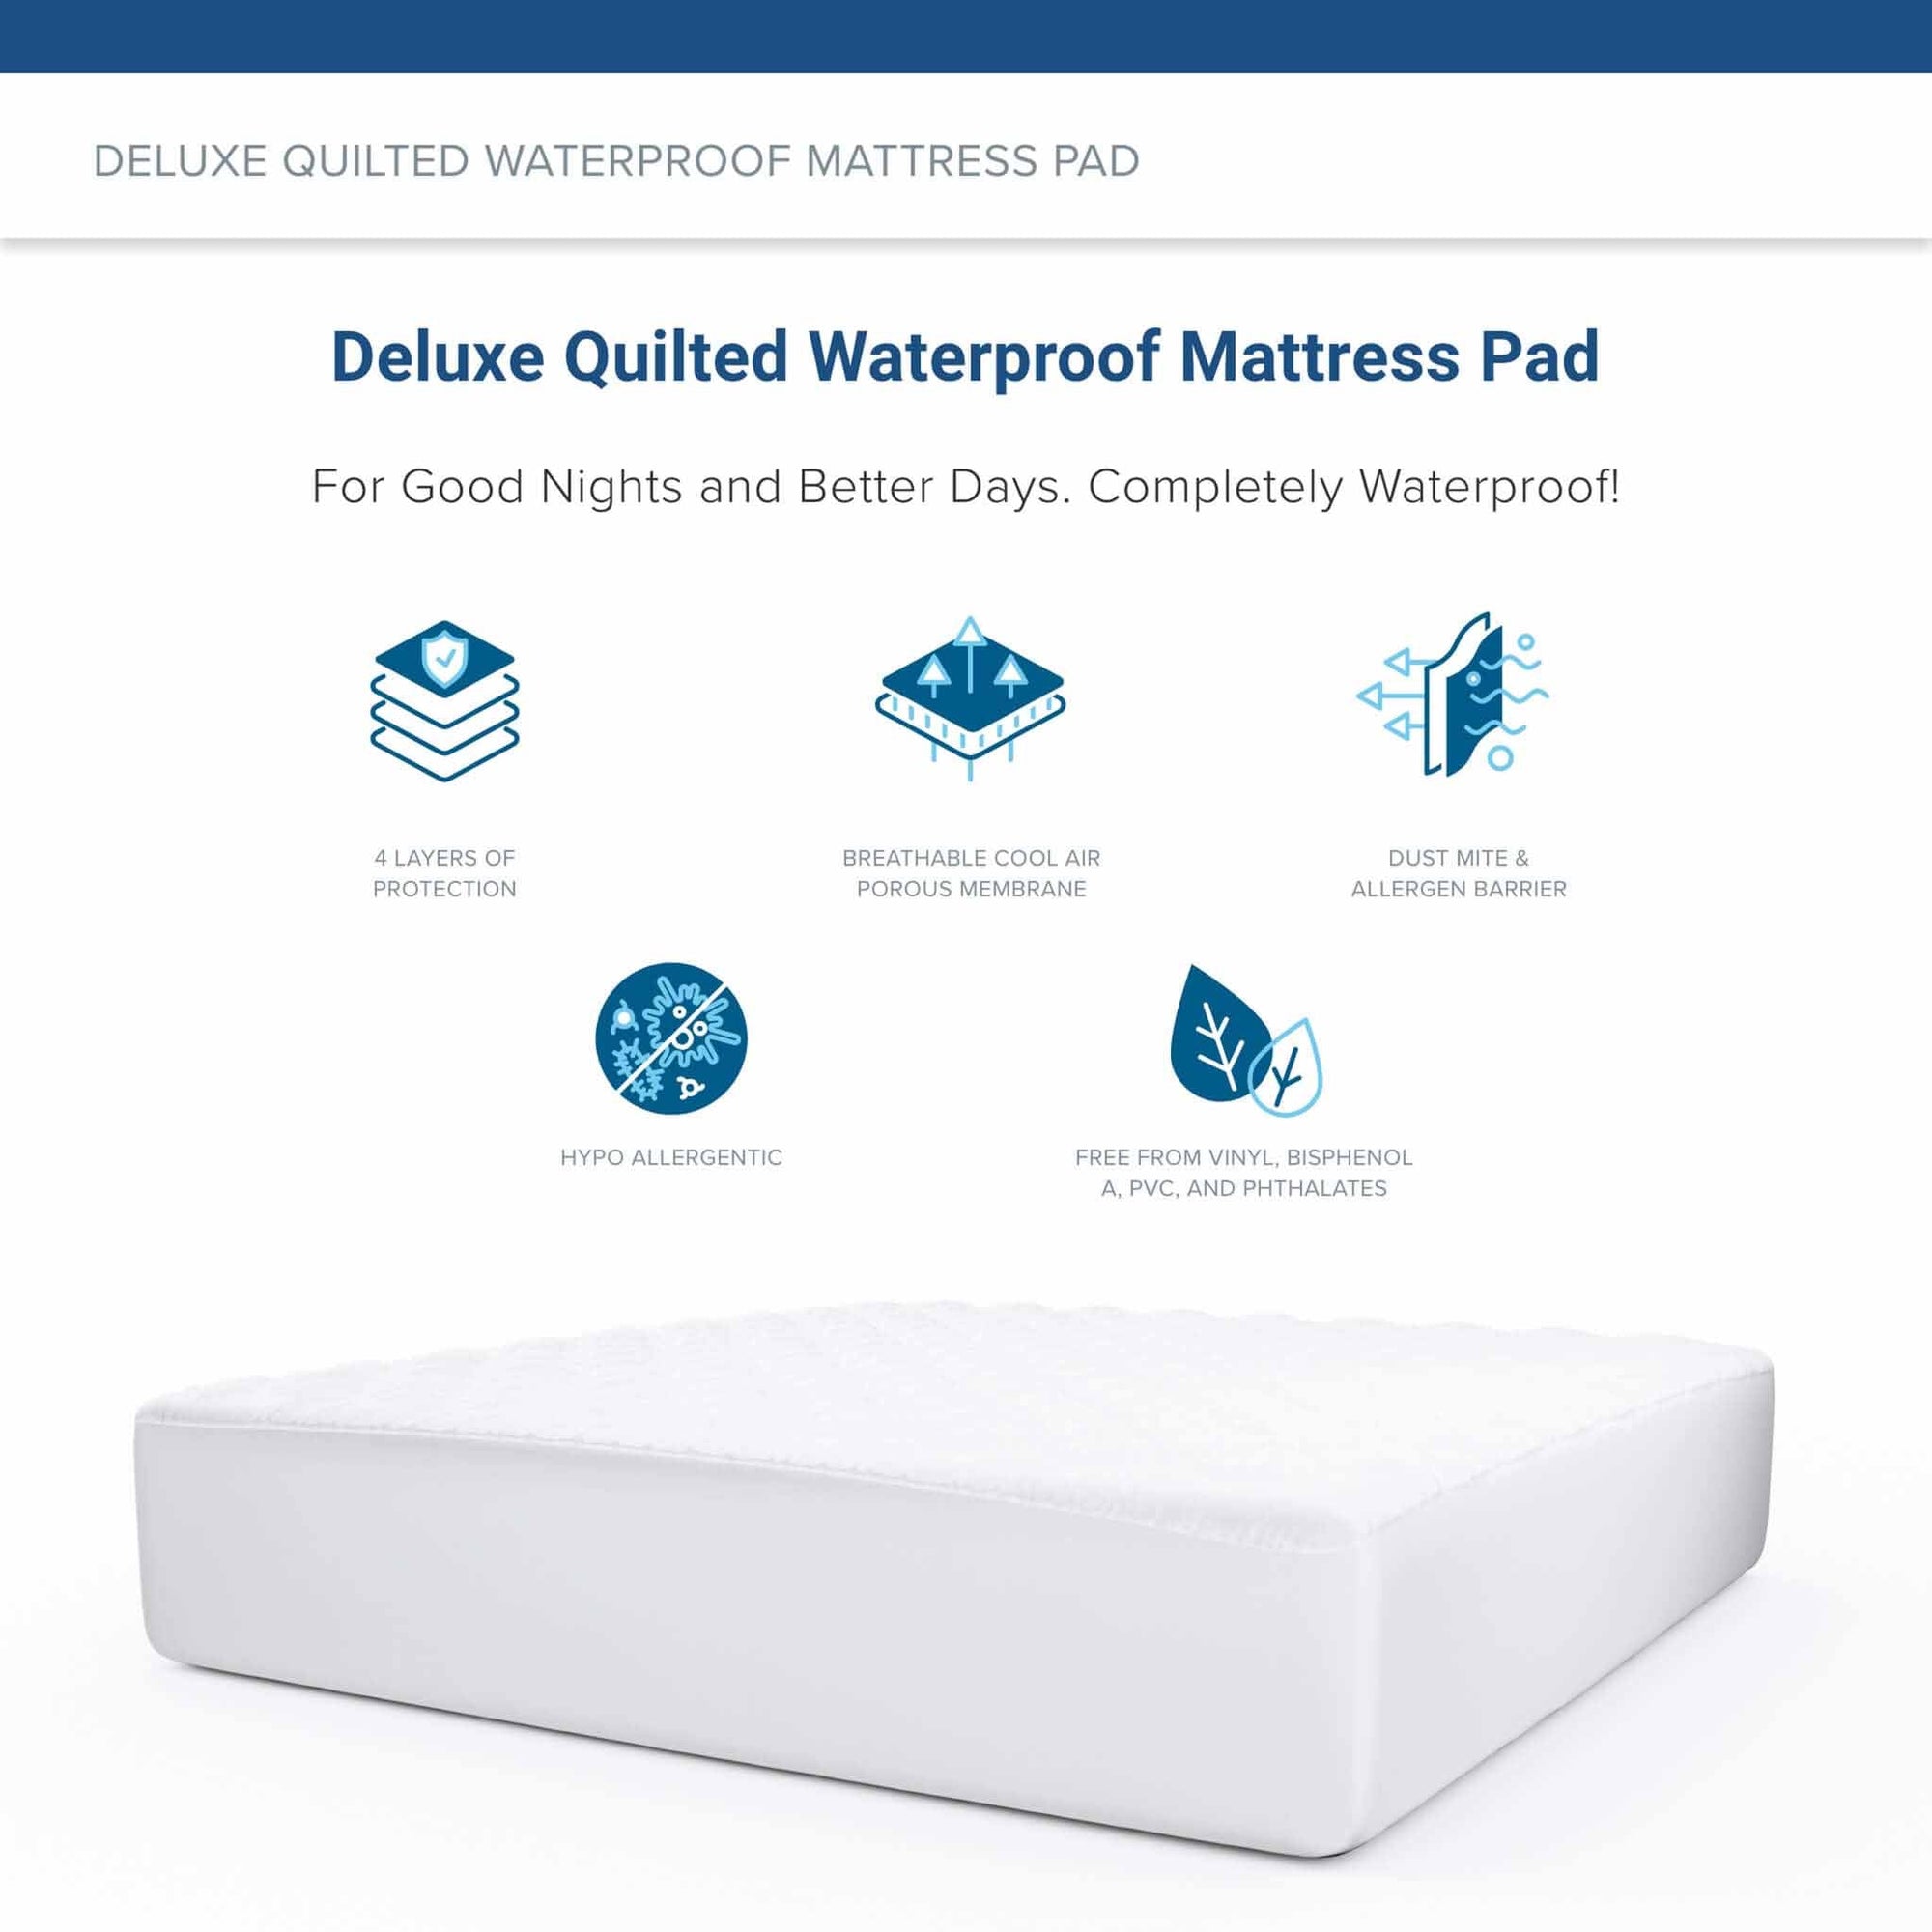 Deluxe Quilted waterproof mattress pads - For a Goods Night Sleep